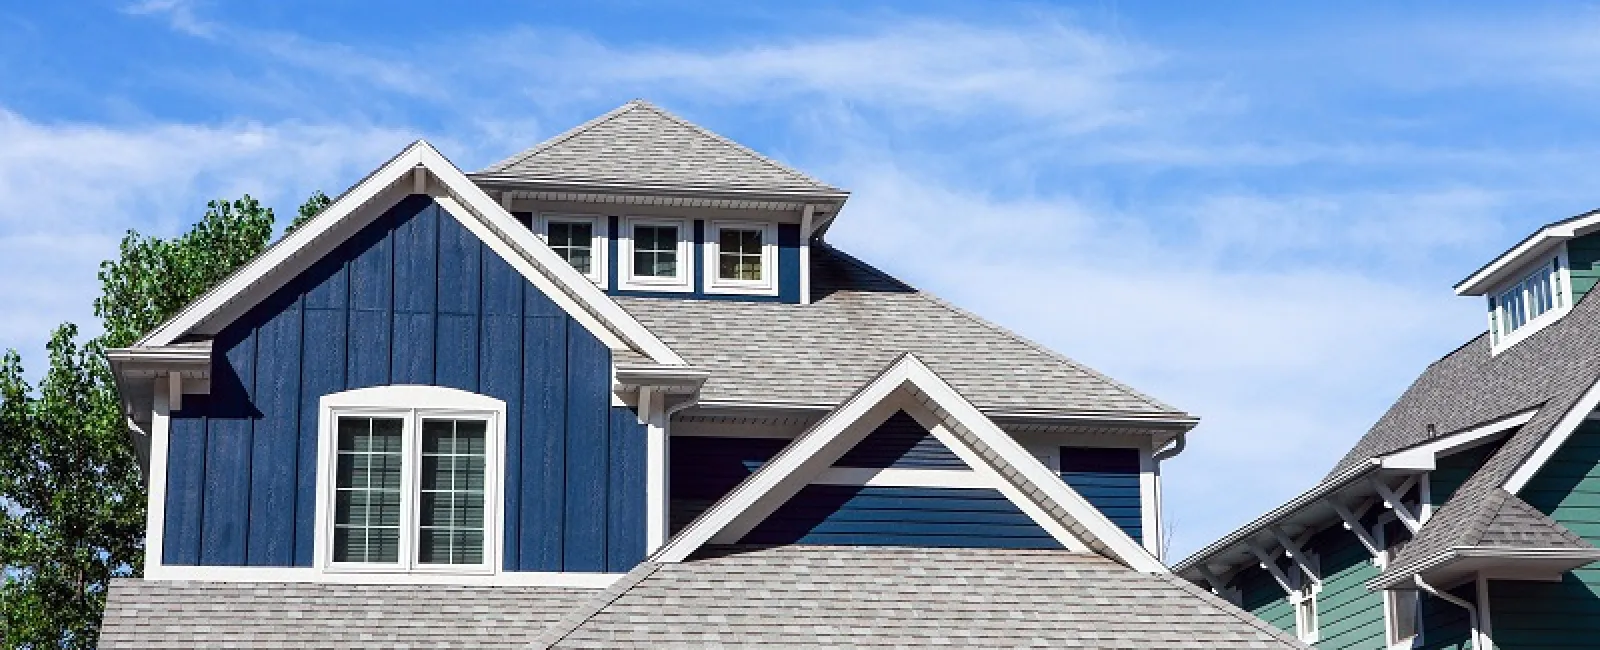 How Shingle Roof Installation Impacts Your Home Value